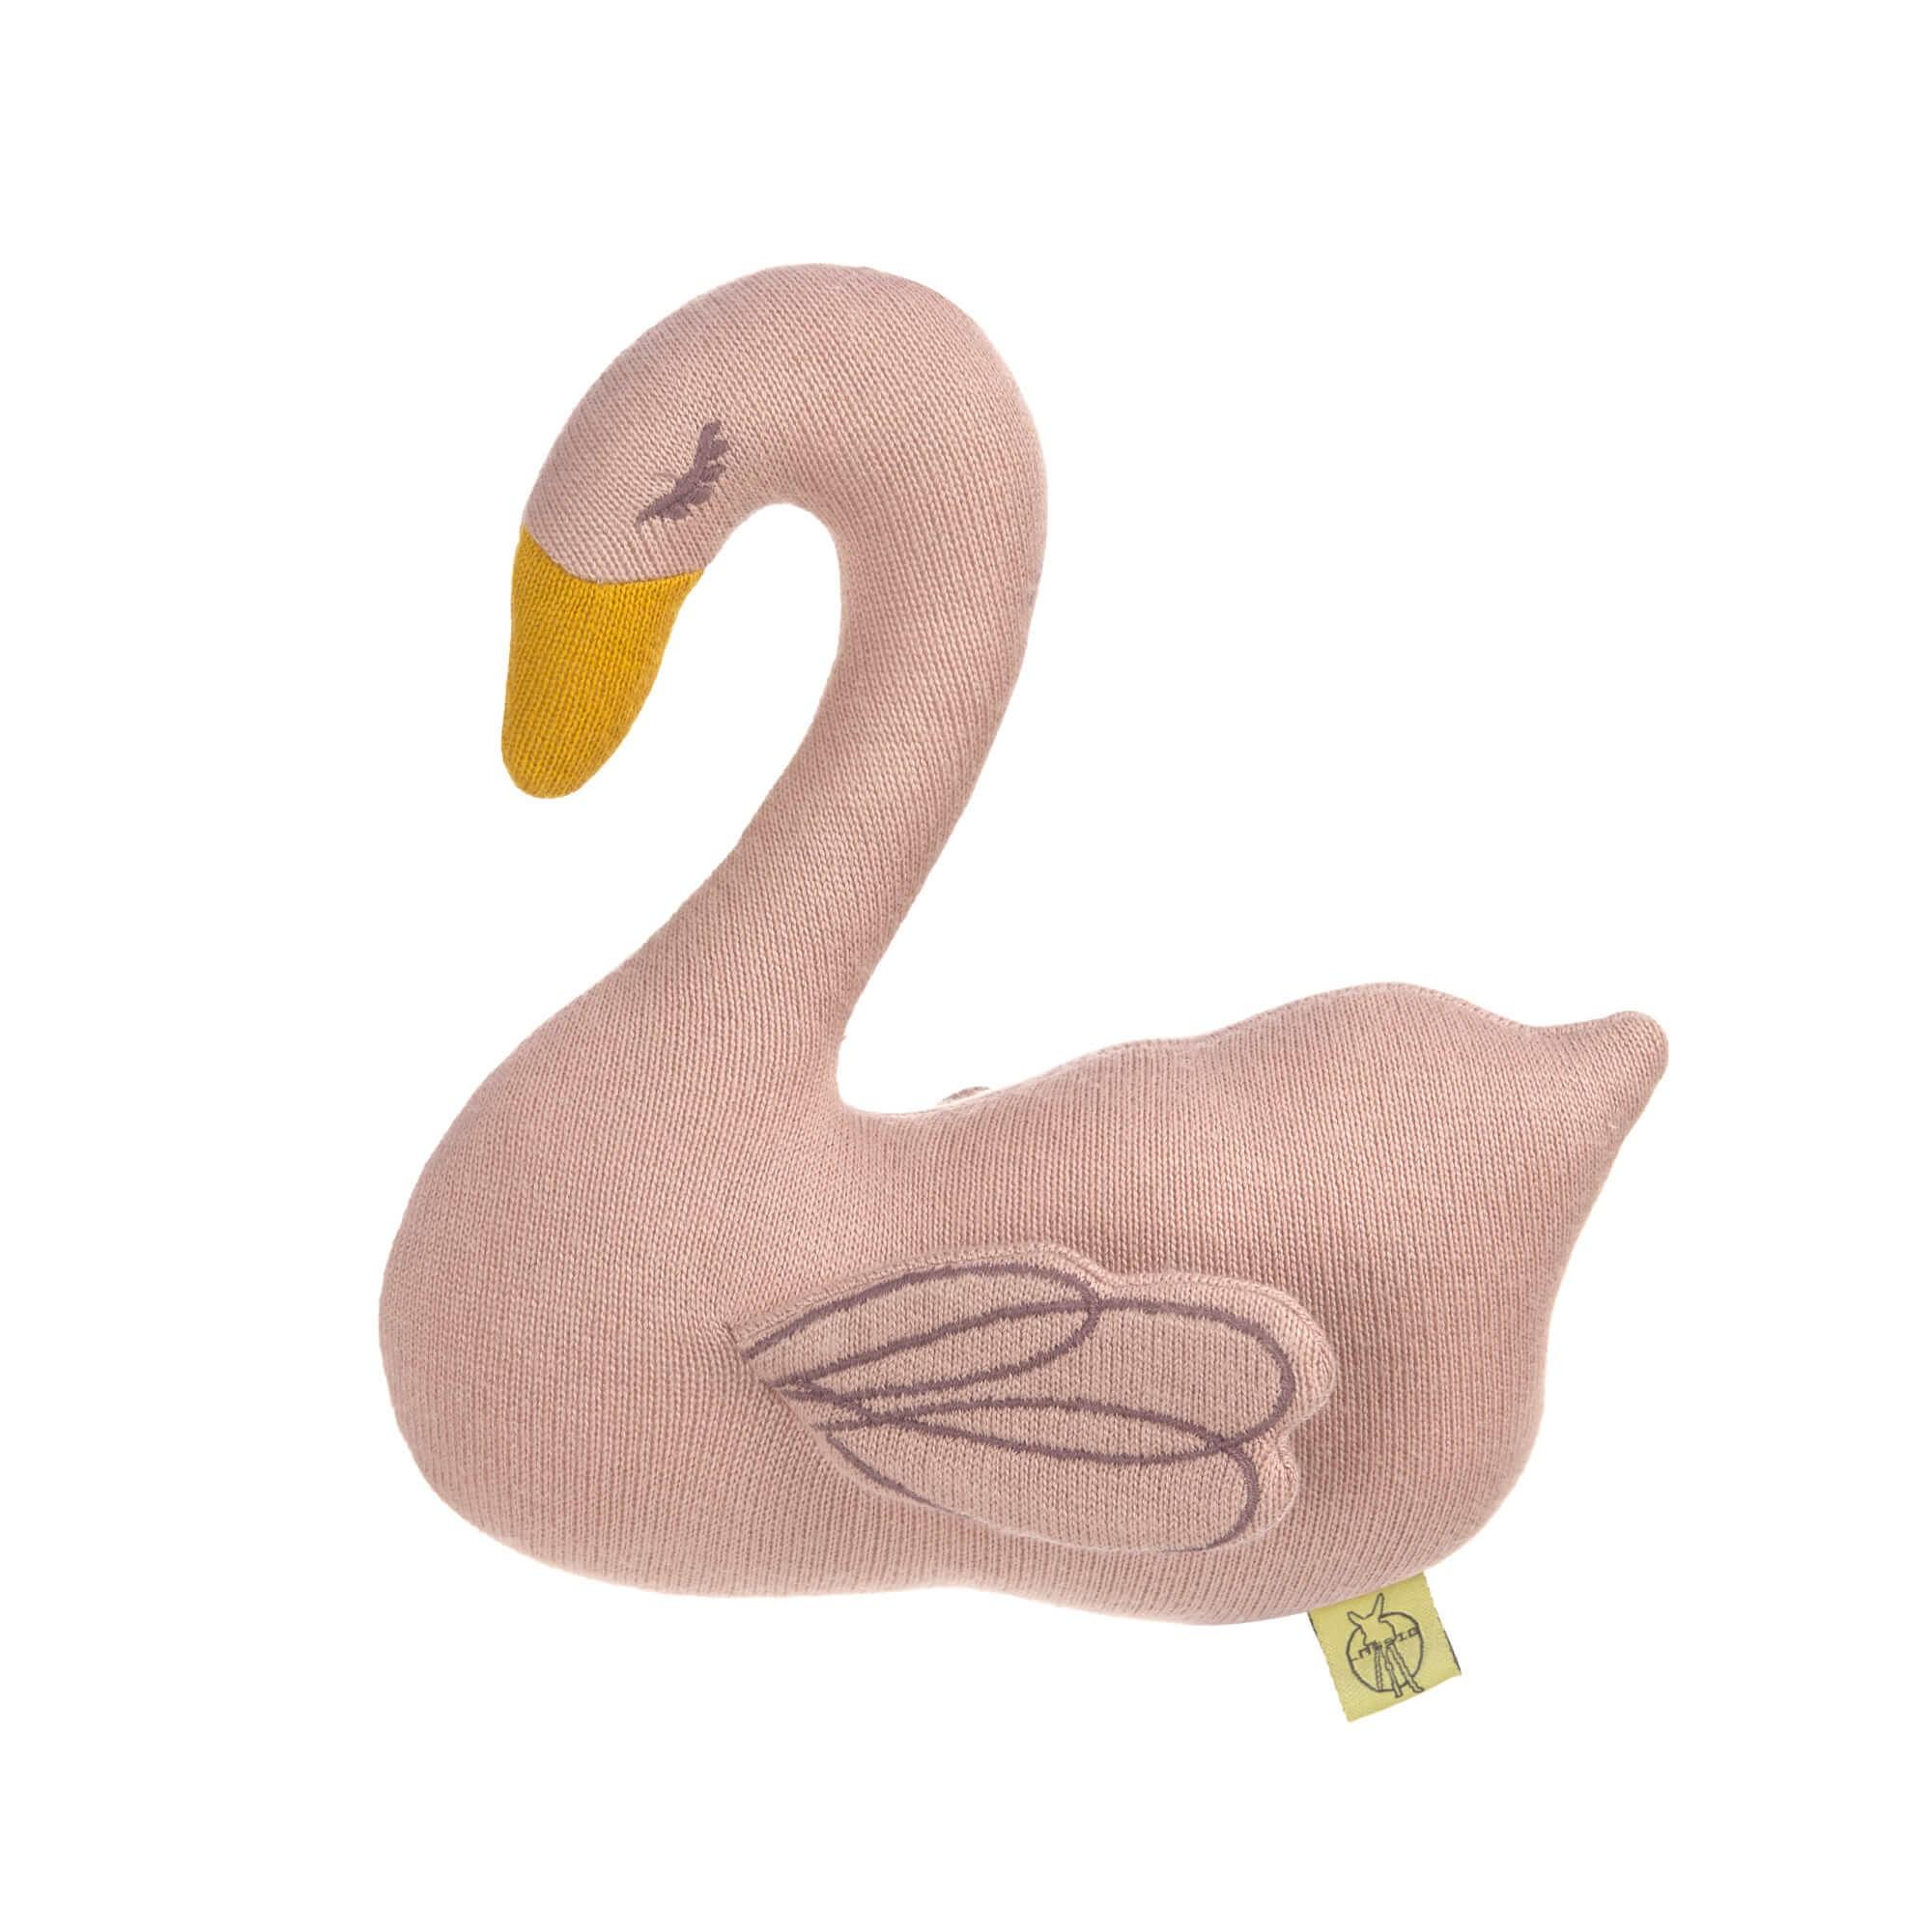 Lassig - Knitted toy with rattle/crackle little water swan